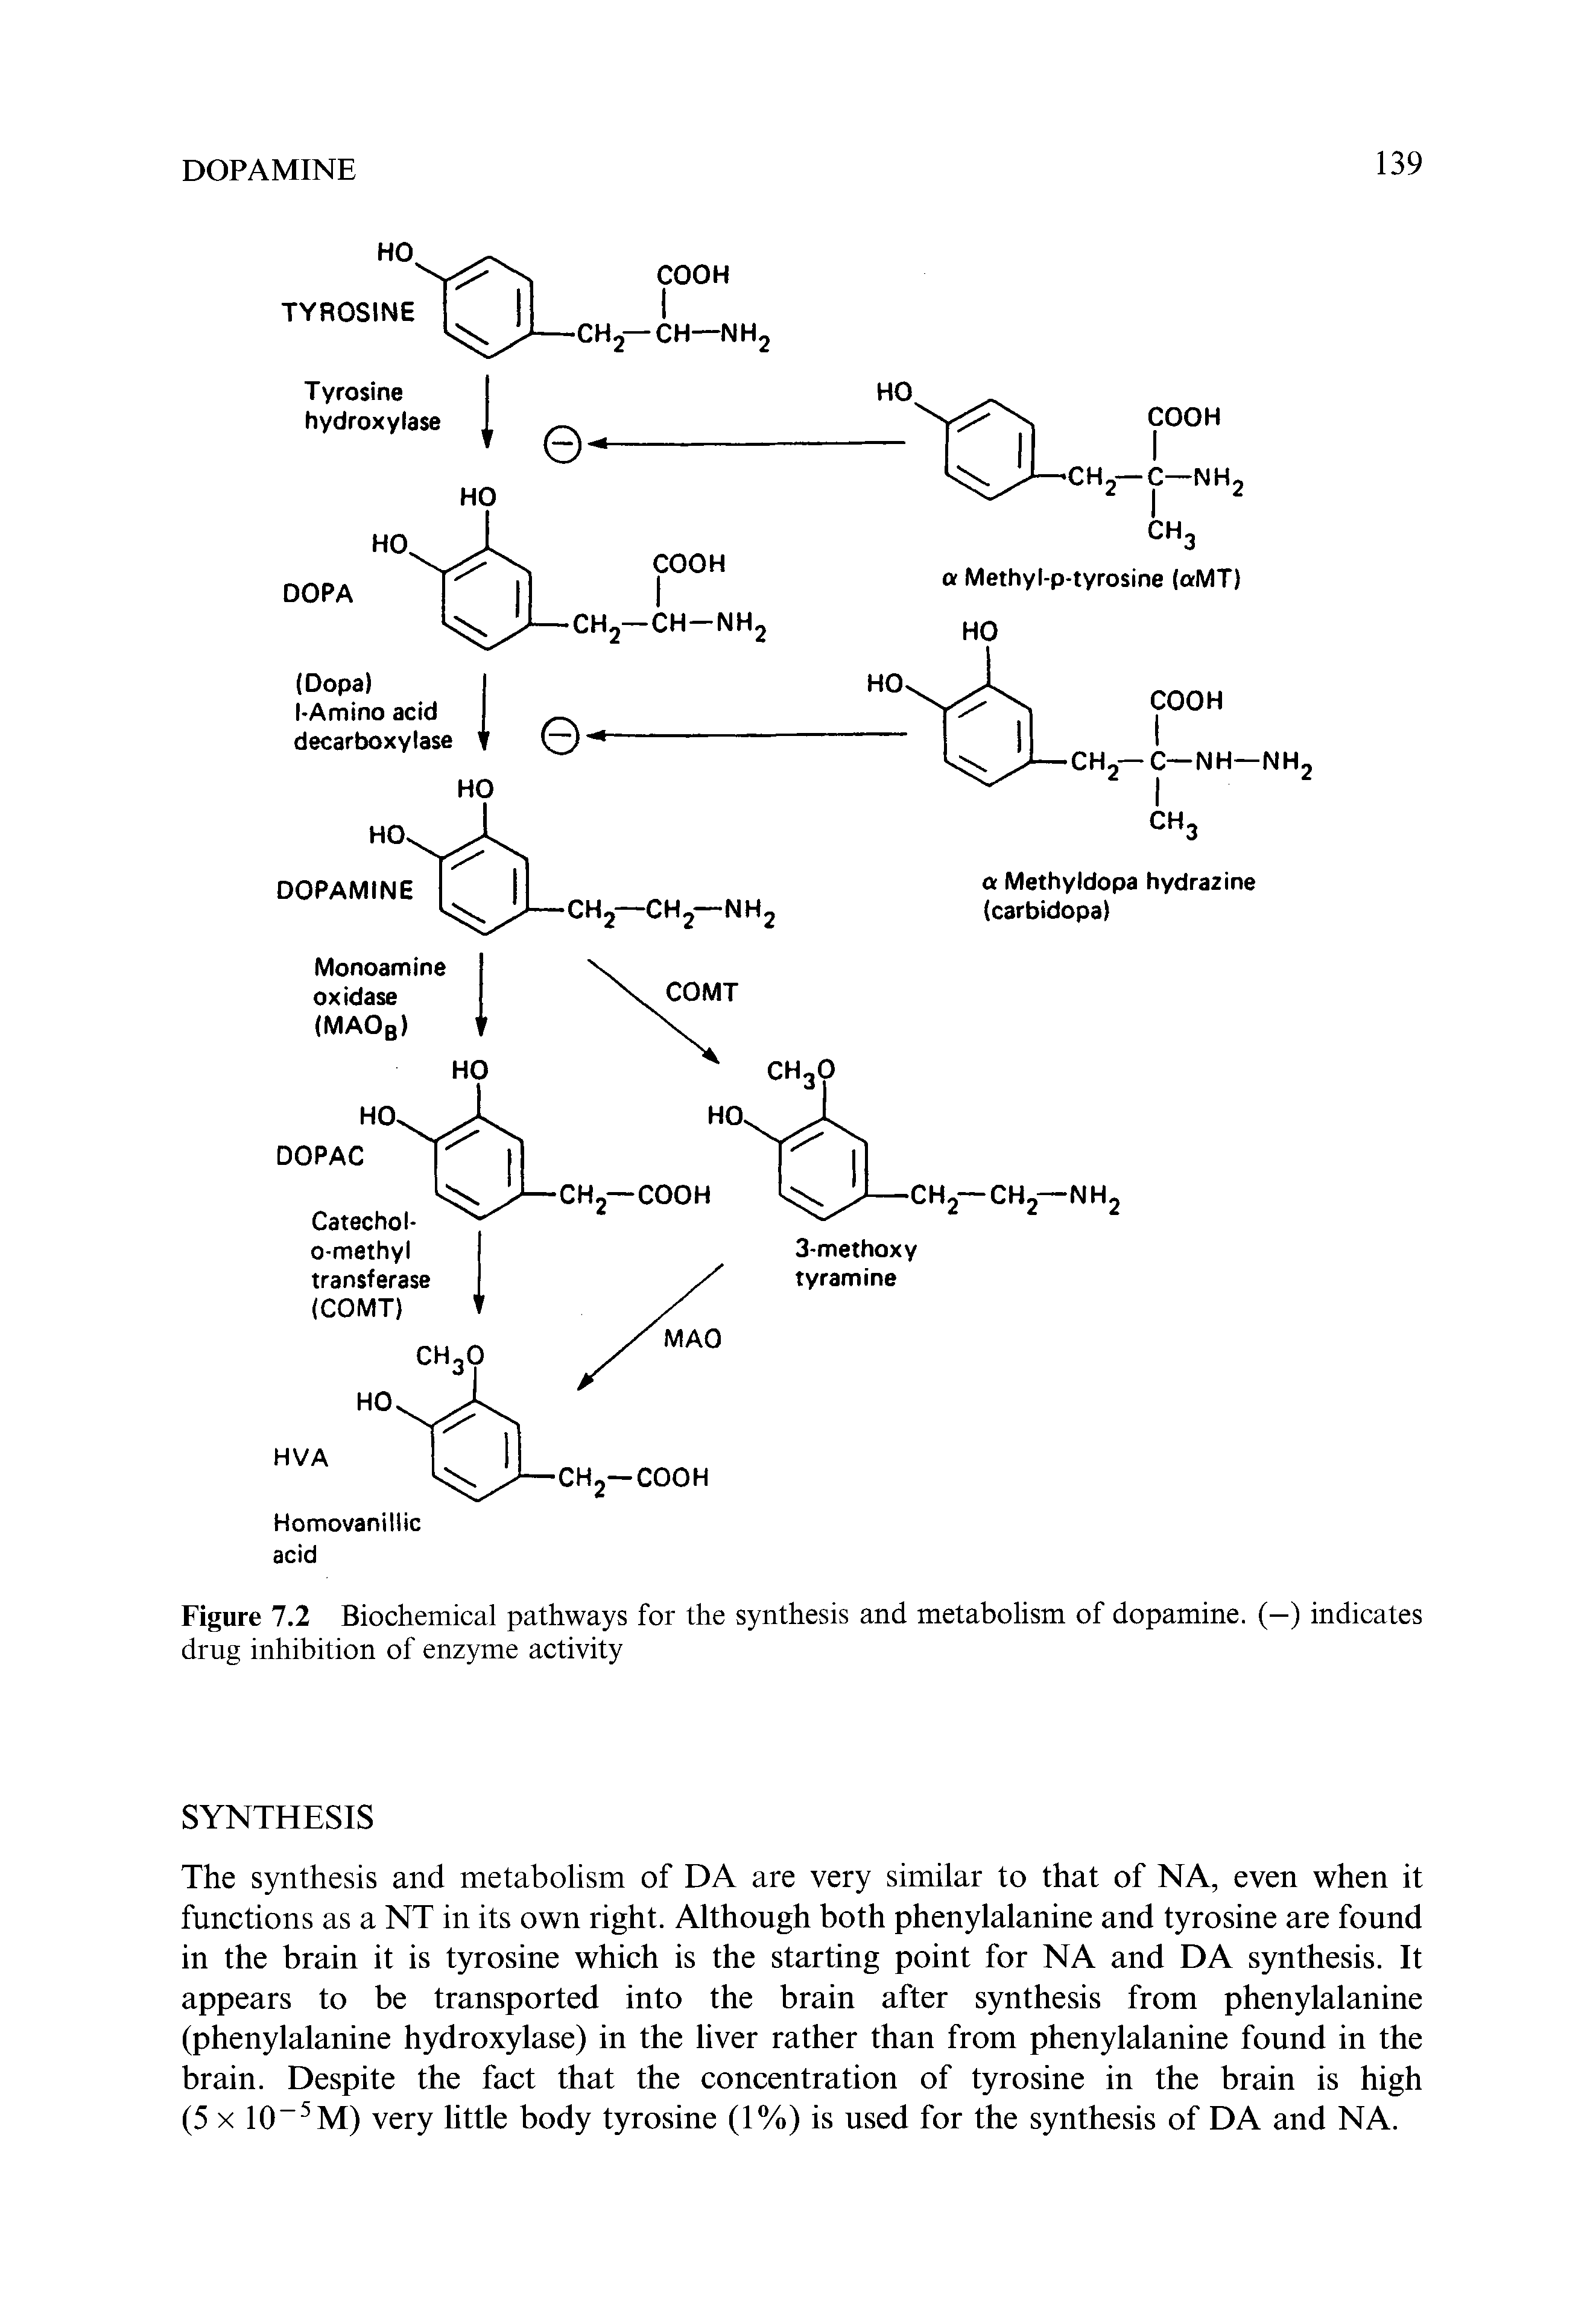 Figure 7.2 Biochemical pathways for the synthesis and metabolism of dopamine. (—) indicates drug inhibition of enzyme activity...